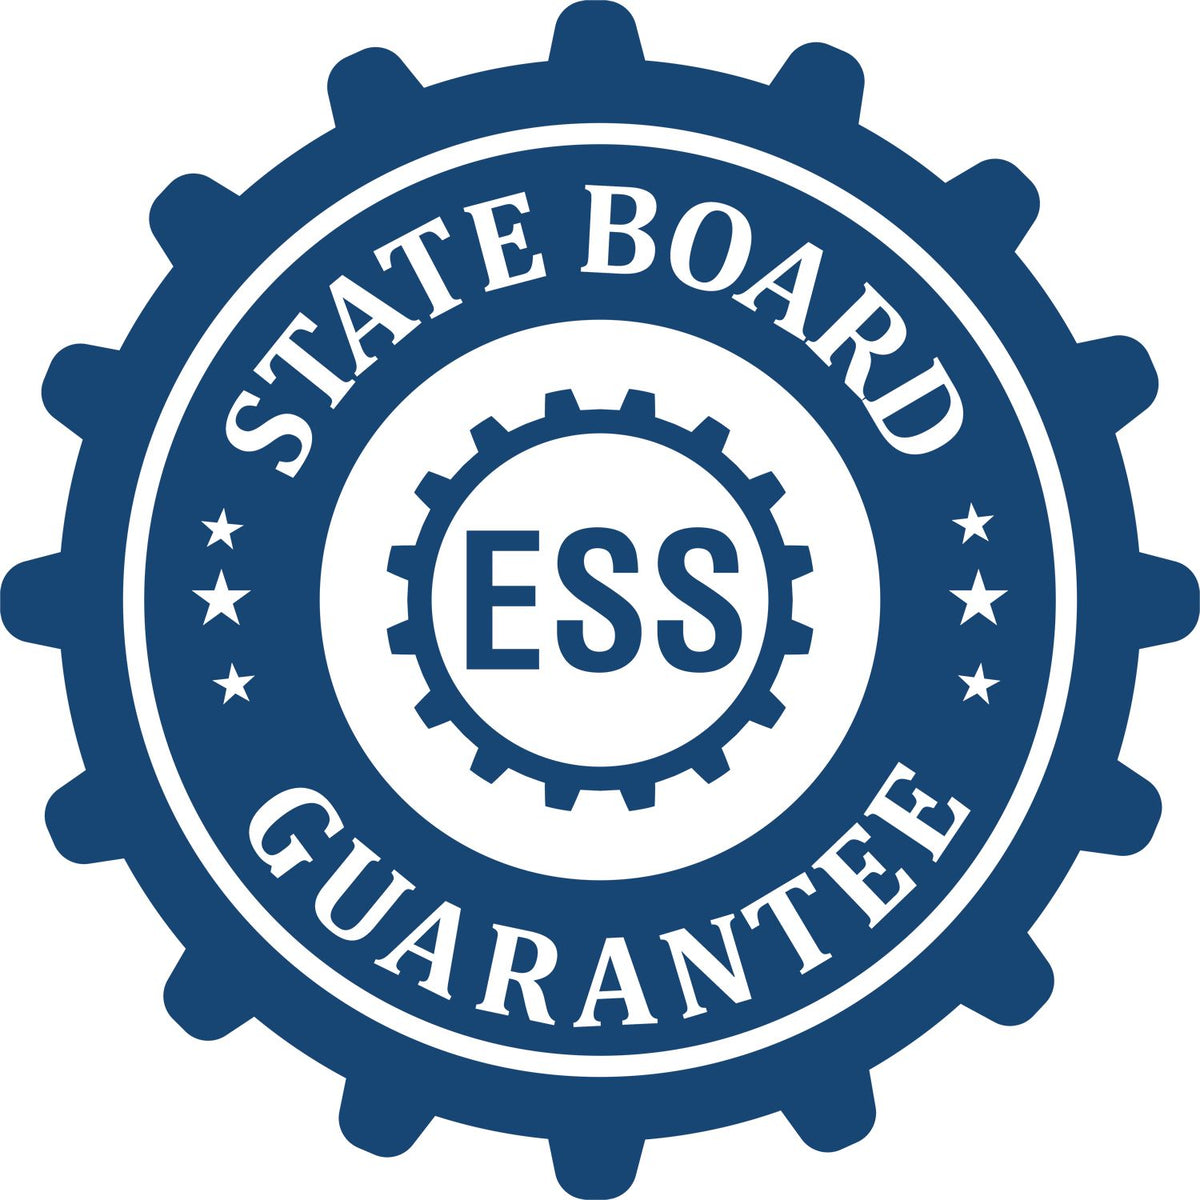 An emblem in a gear shape illustrating a state board guarantee for the Digital Maryland Landscape Architect Stamp product.